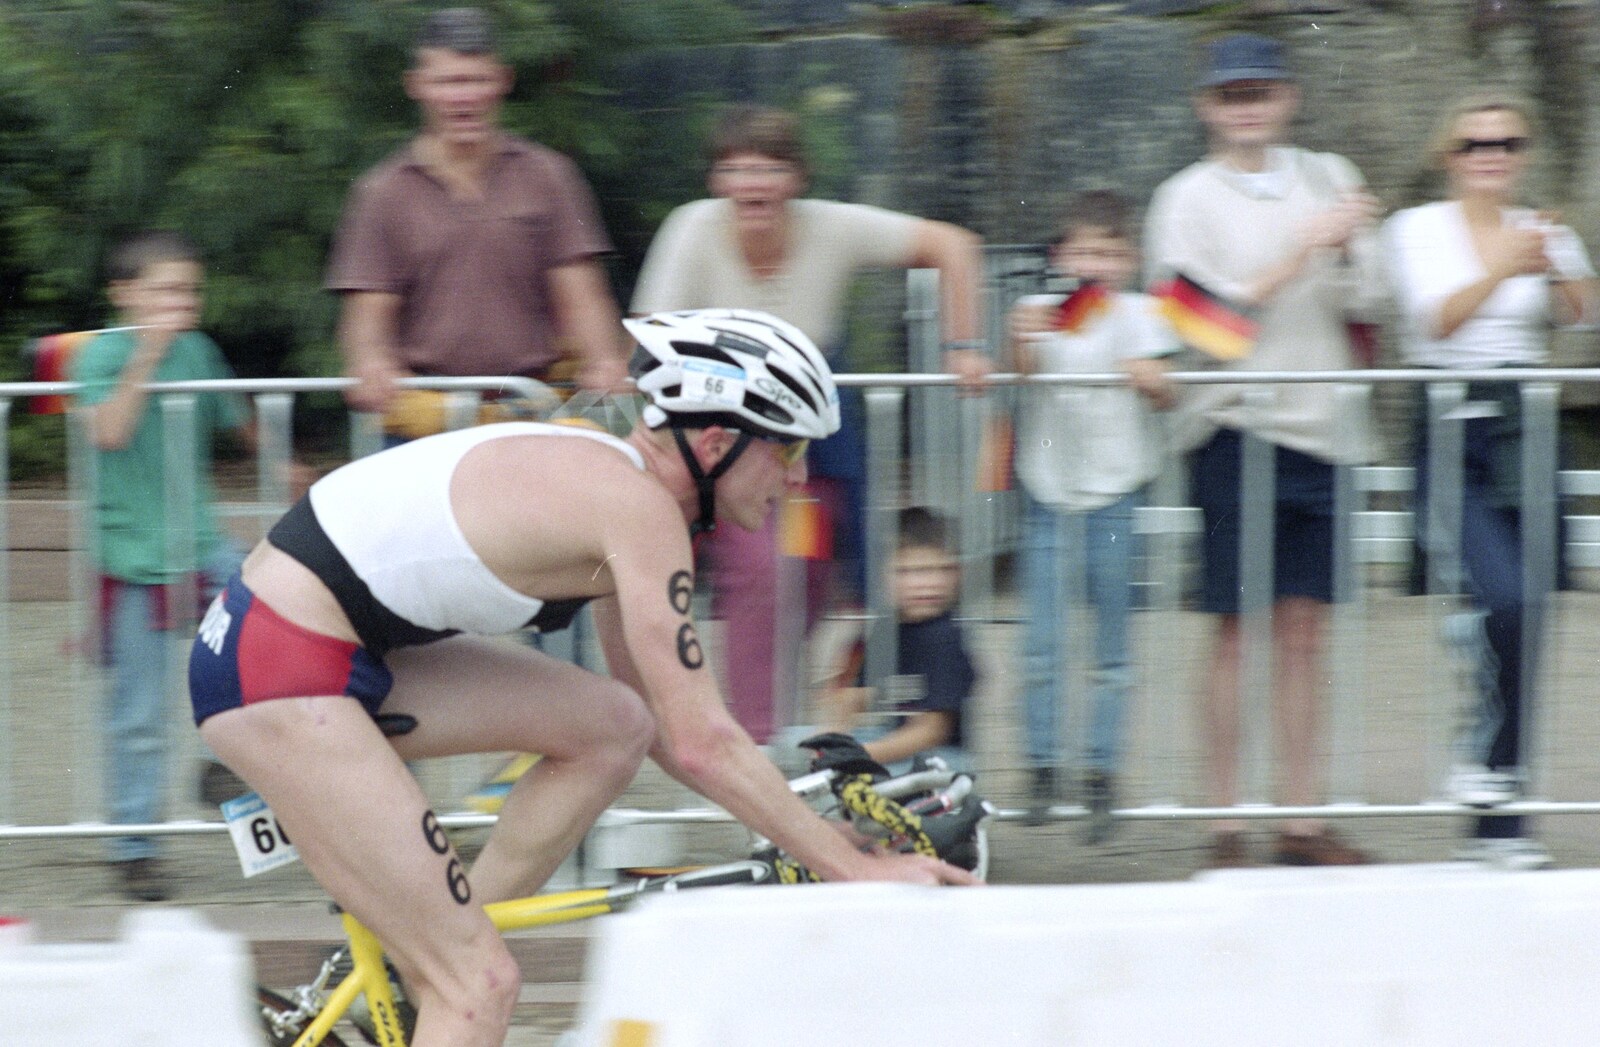 A cyclist in budgie smugglers speeds past from Sydney Triathlon, Sydney, Australia - 16th April 2000